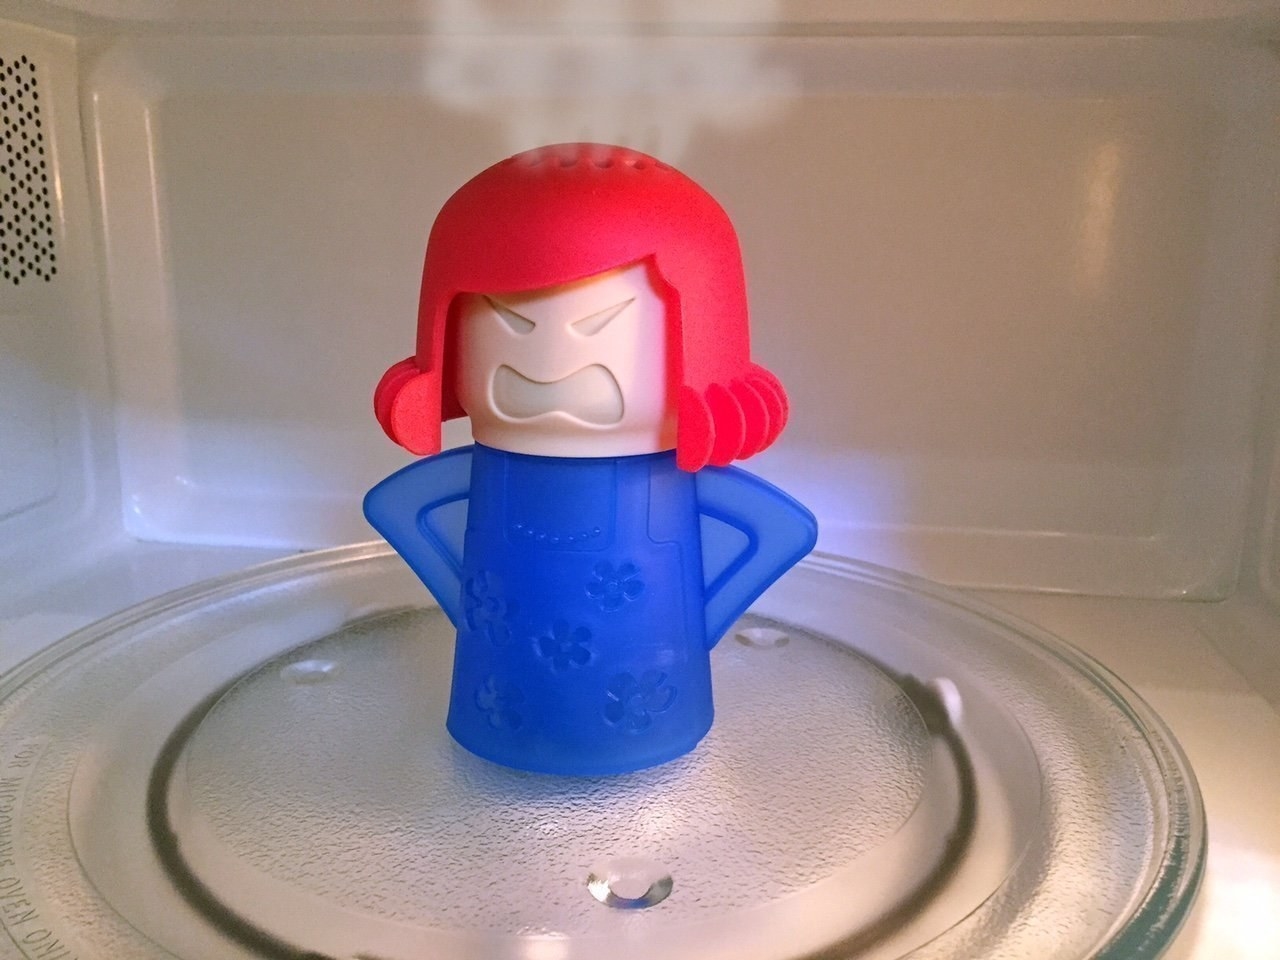 the mom shaped cleaning tool in a microwave